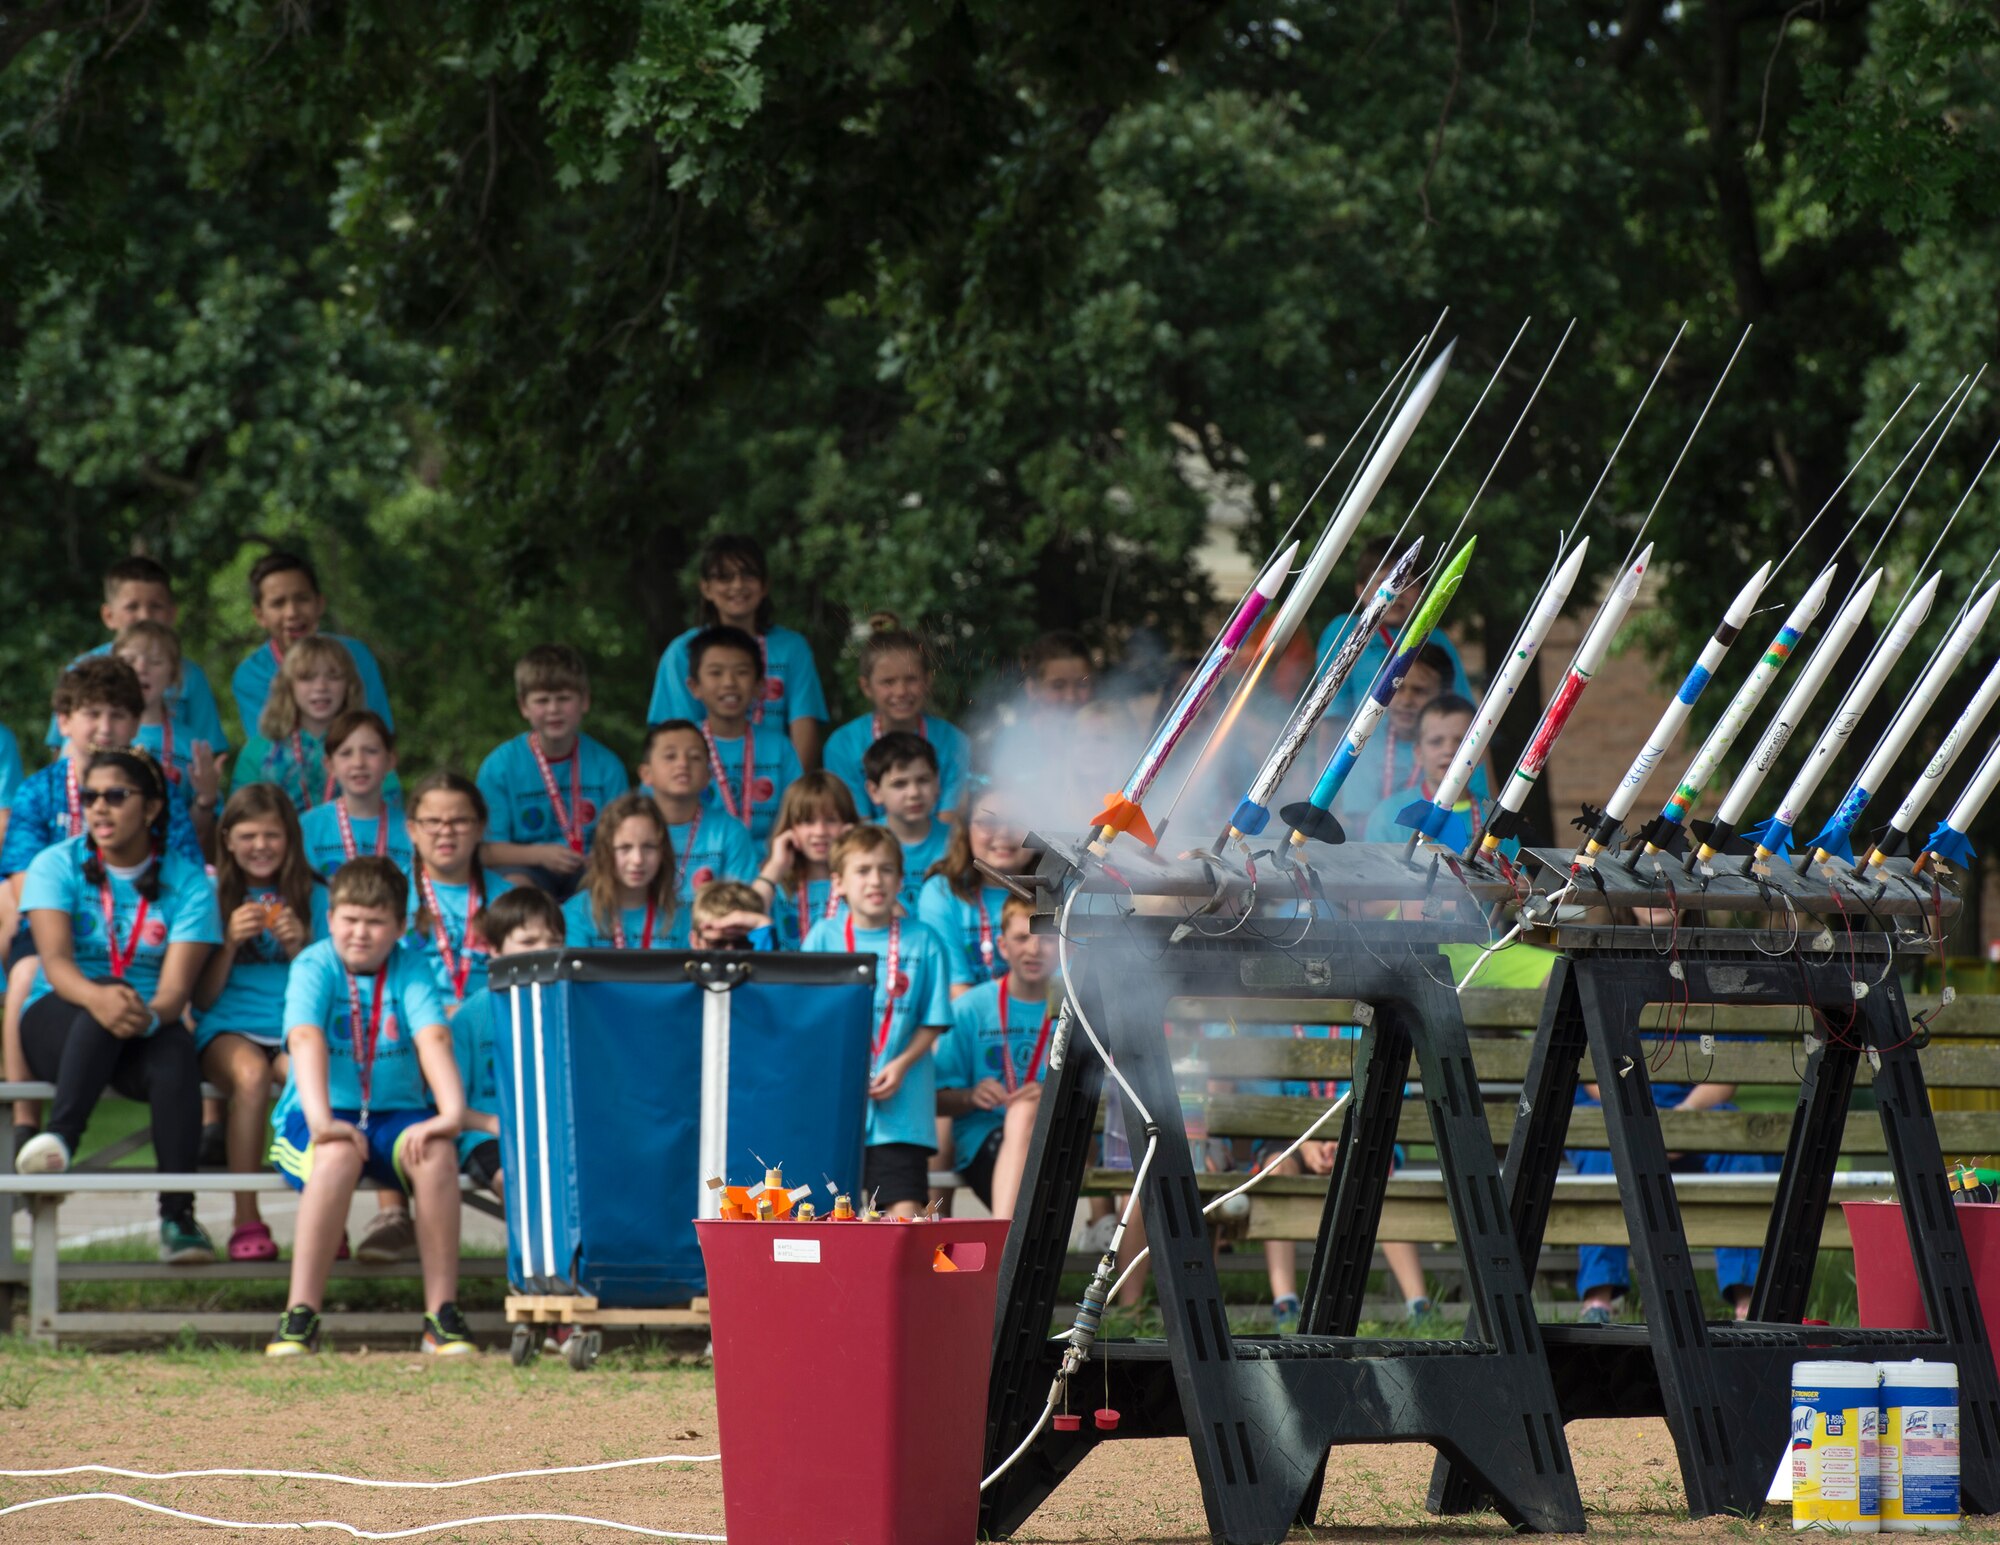 Students from STARBASE Minnesota watch rockets blast off from the launch pad in St. Paul, Minn., July 18, 2019.